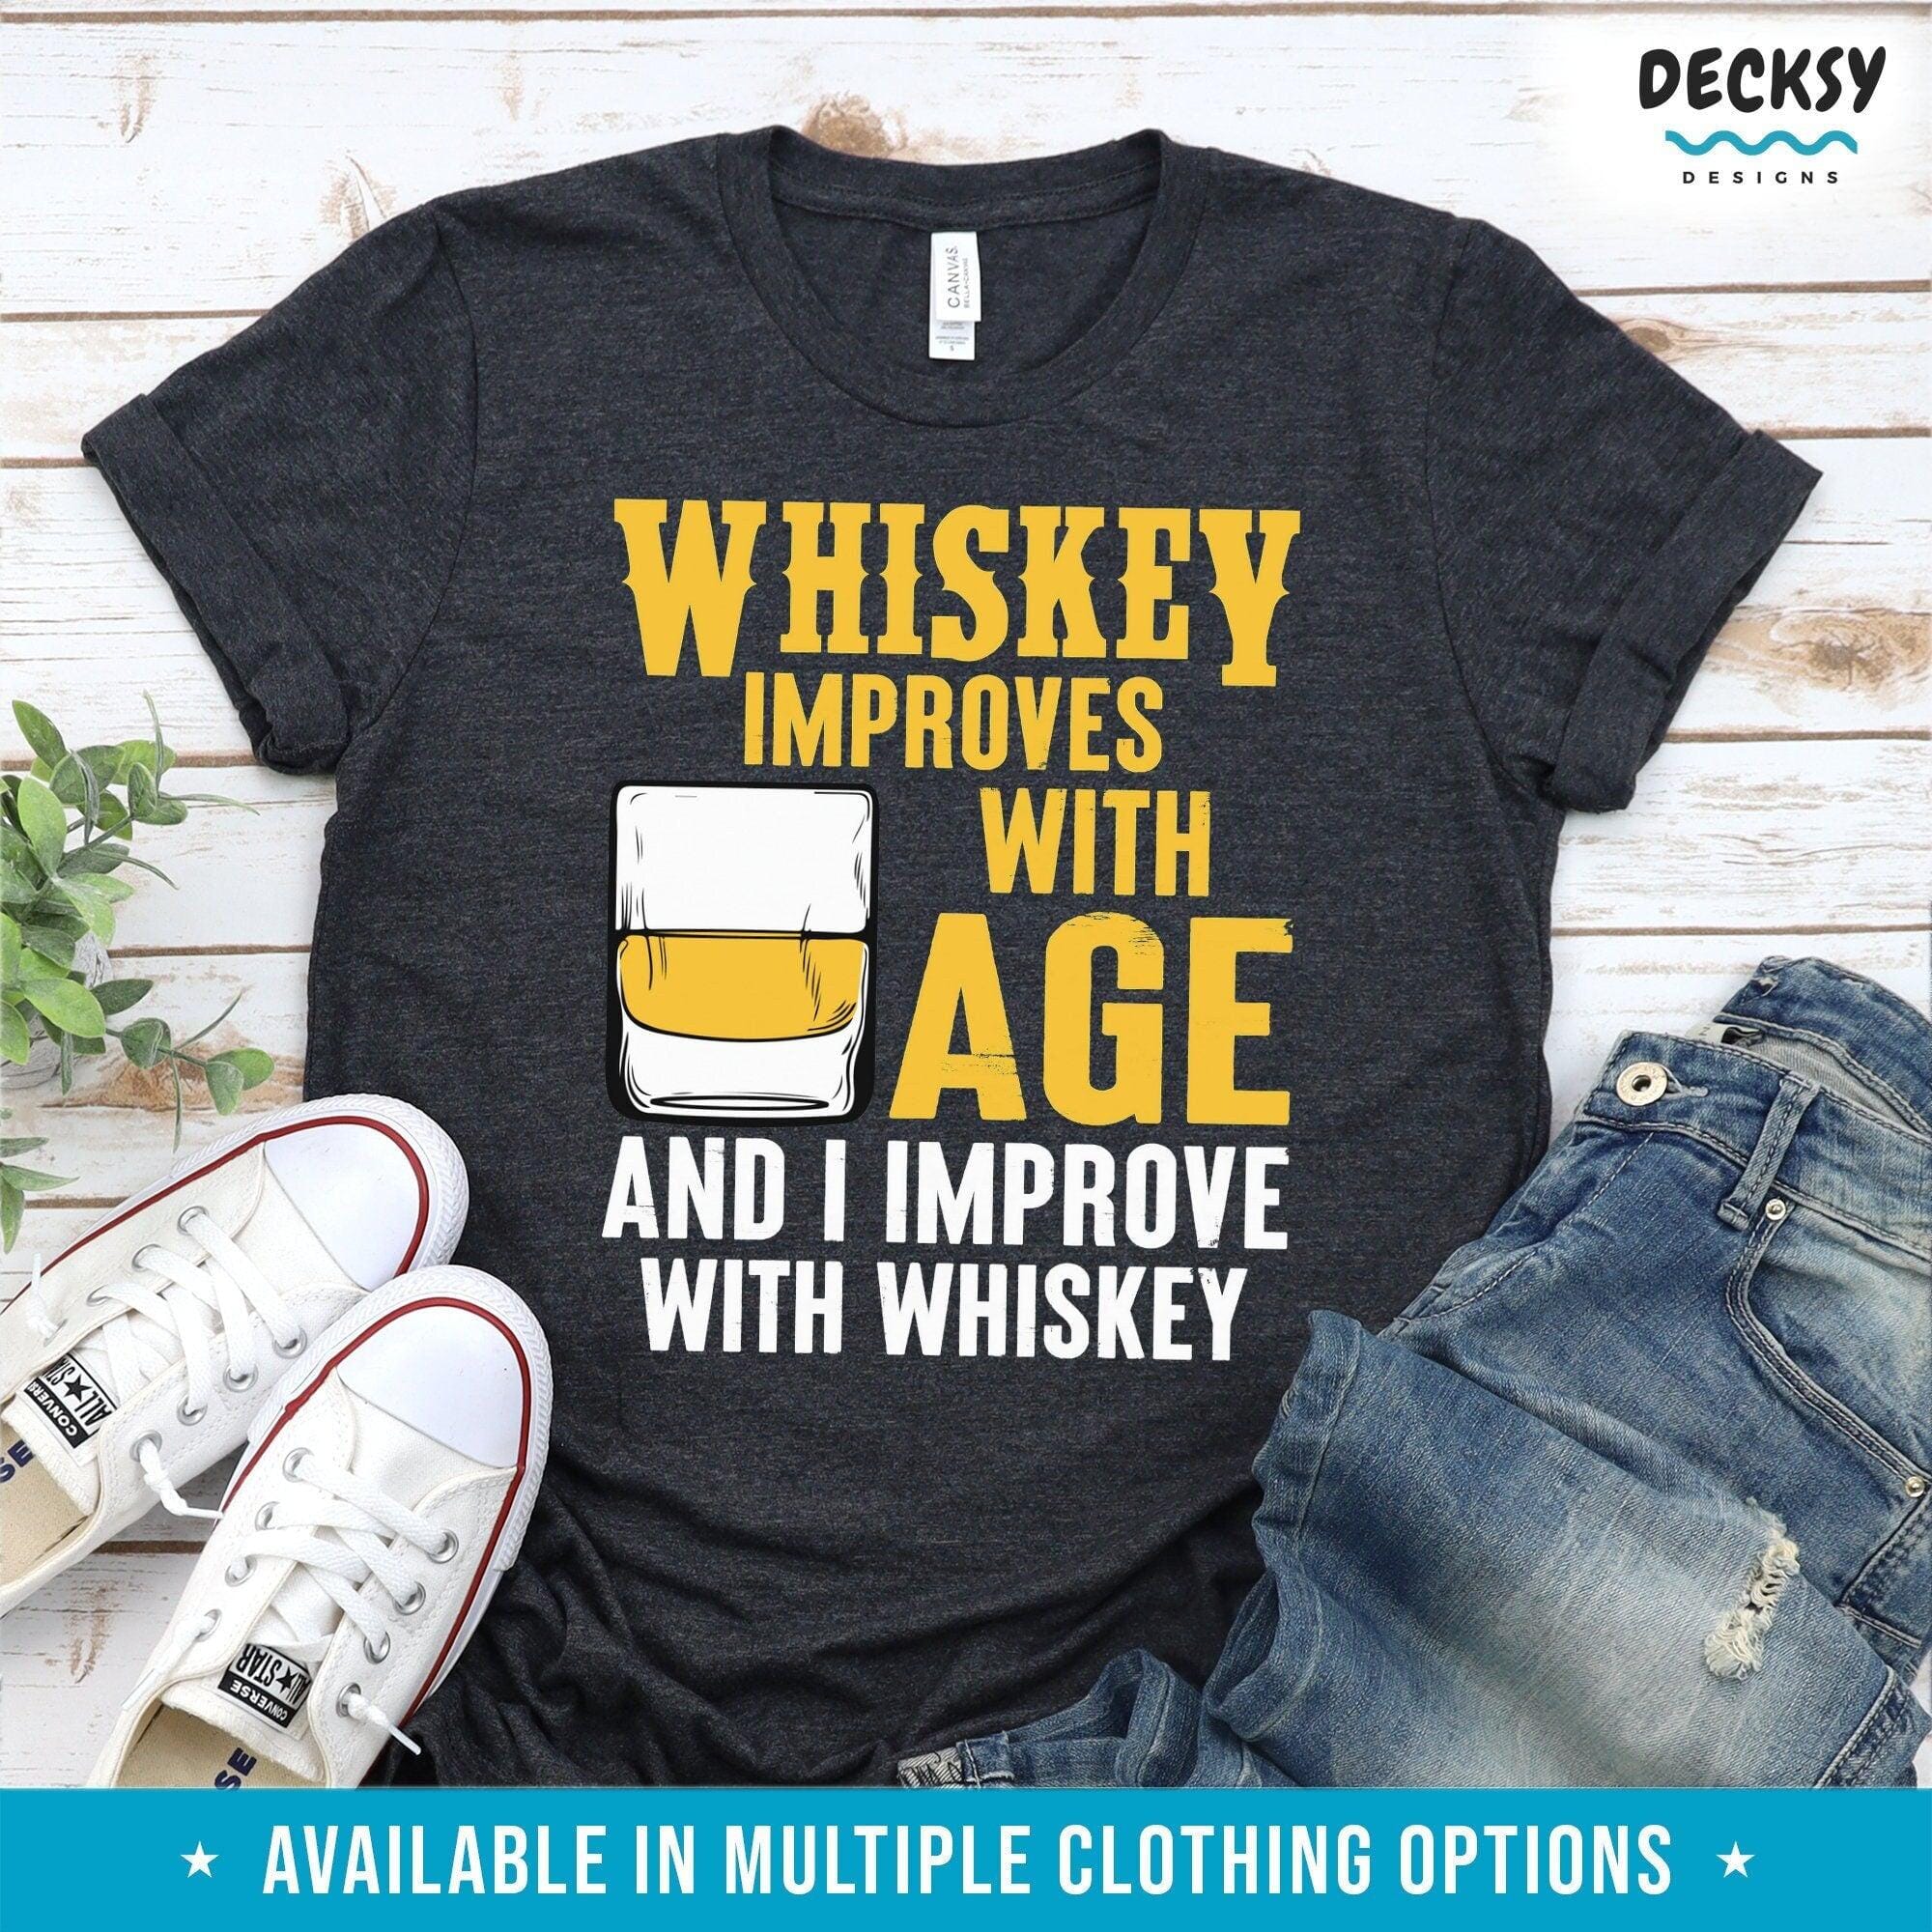 Drinking Tee Shirt, Whiskey Lover Gift-Clothing:Gender-Neutral Adult Clothing:Tops & Tees:T-shirts:Graphic Tees-DecksyDesigns